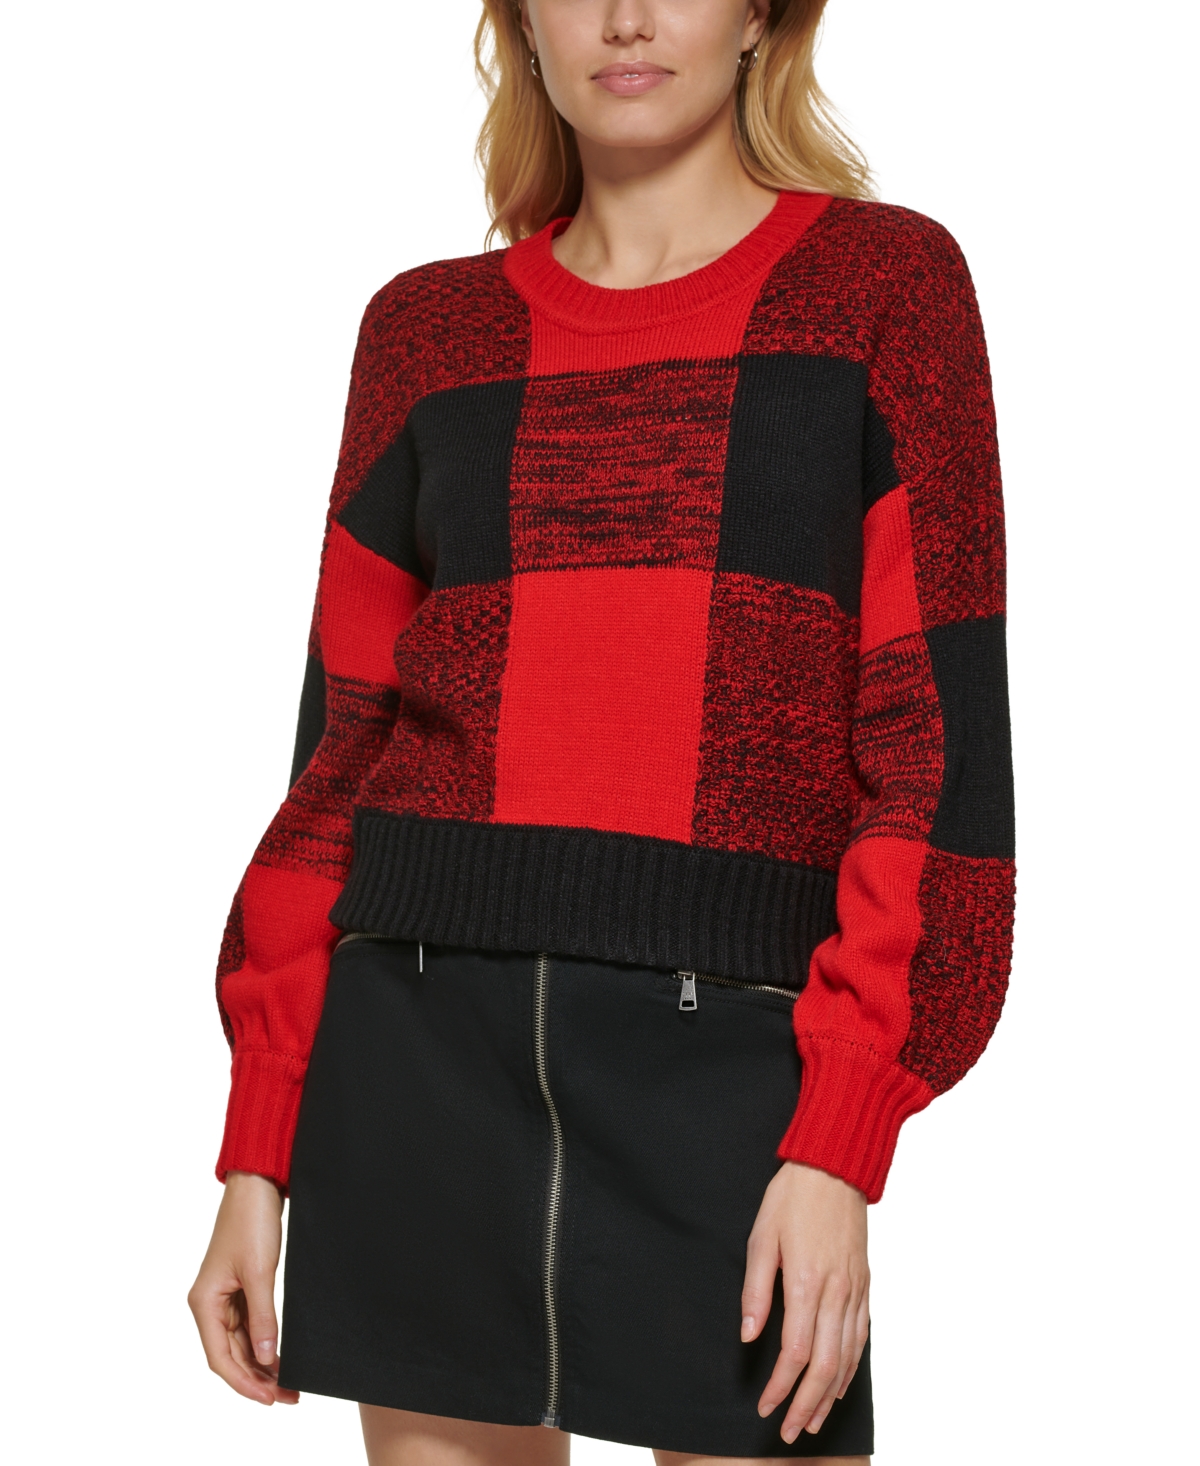 Dkny Jeans Women's Plaid Long-Sleeve Pullover Sweater